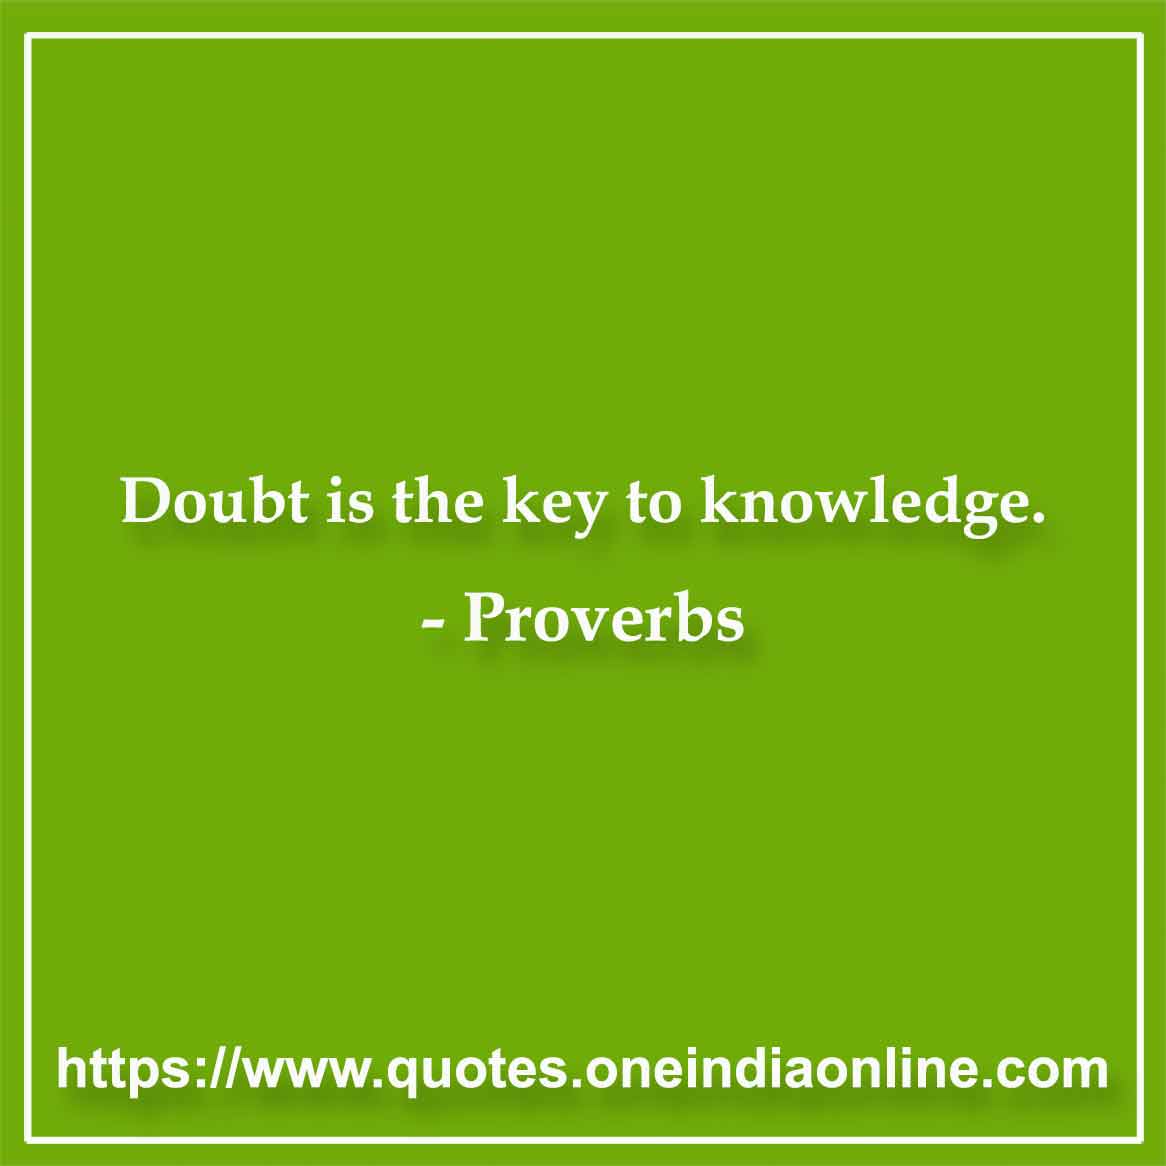 Doubt is the key to knowledge.

Iranian Proverbs